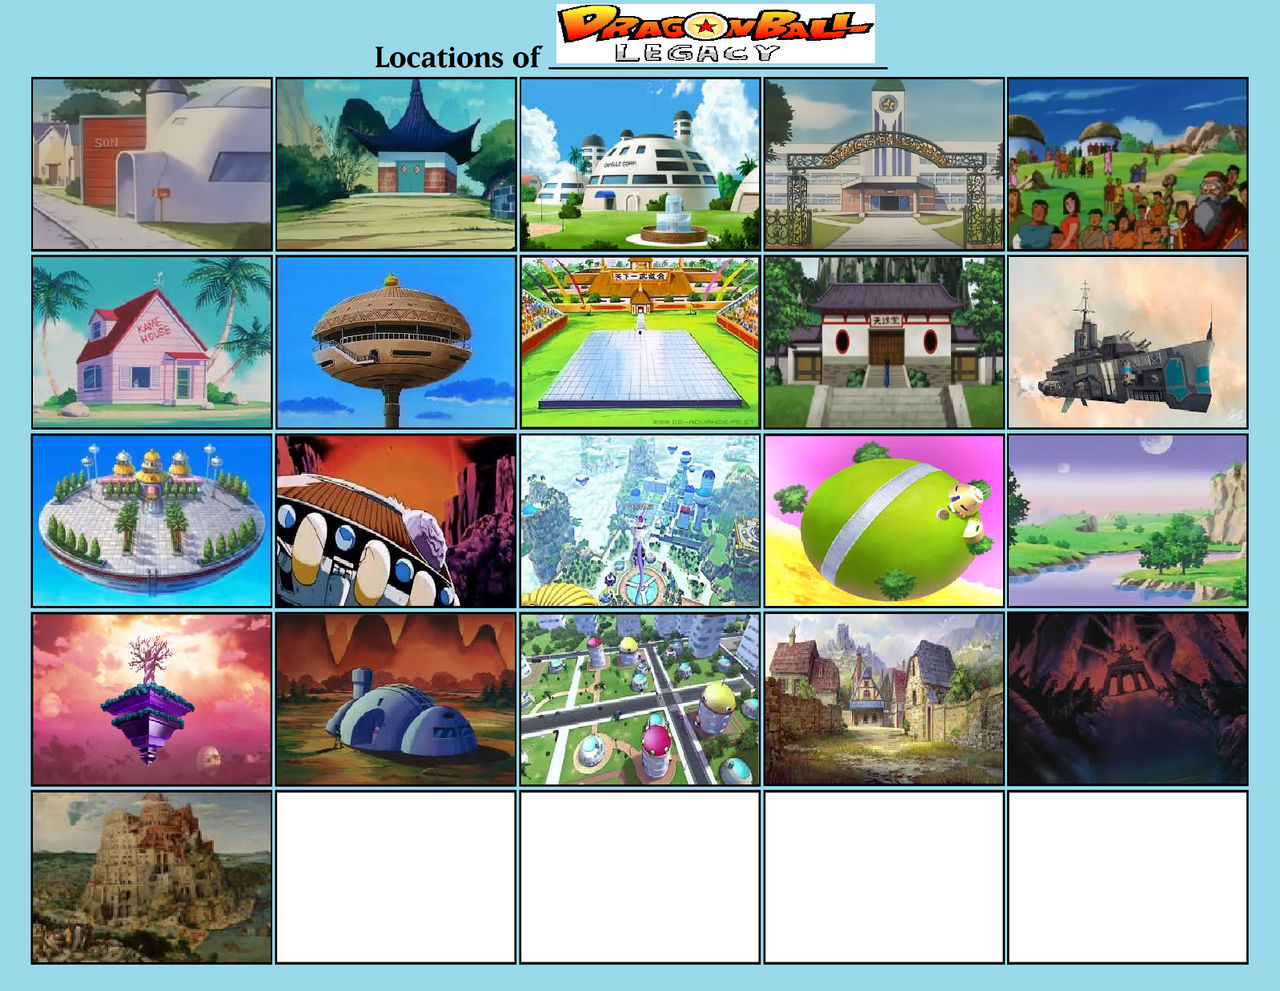 Locations of Dragon Ball Legacy Timeline by coleroboman on DeviantArt